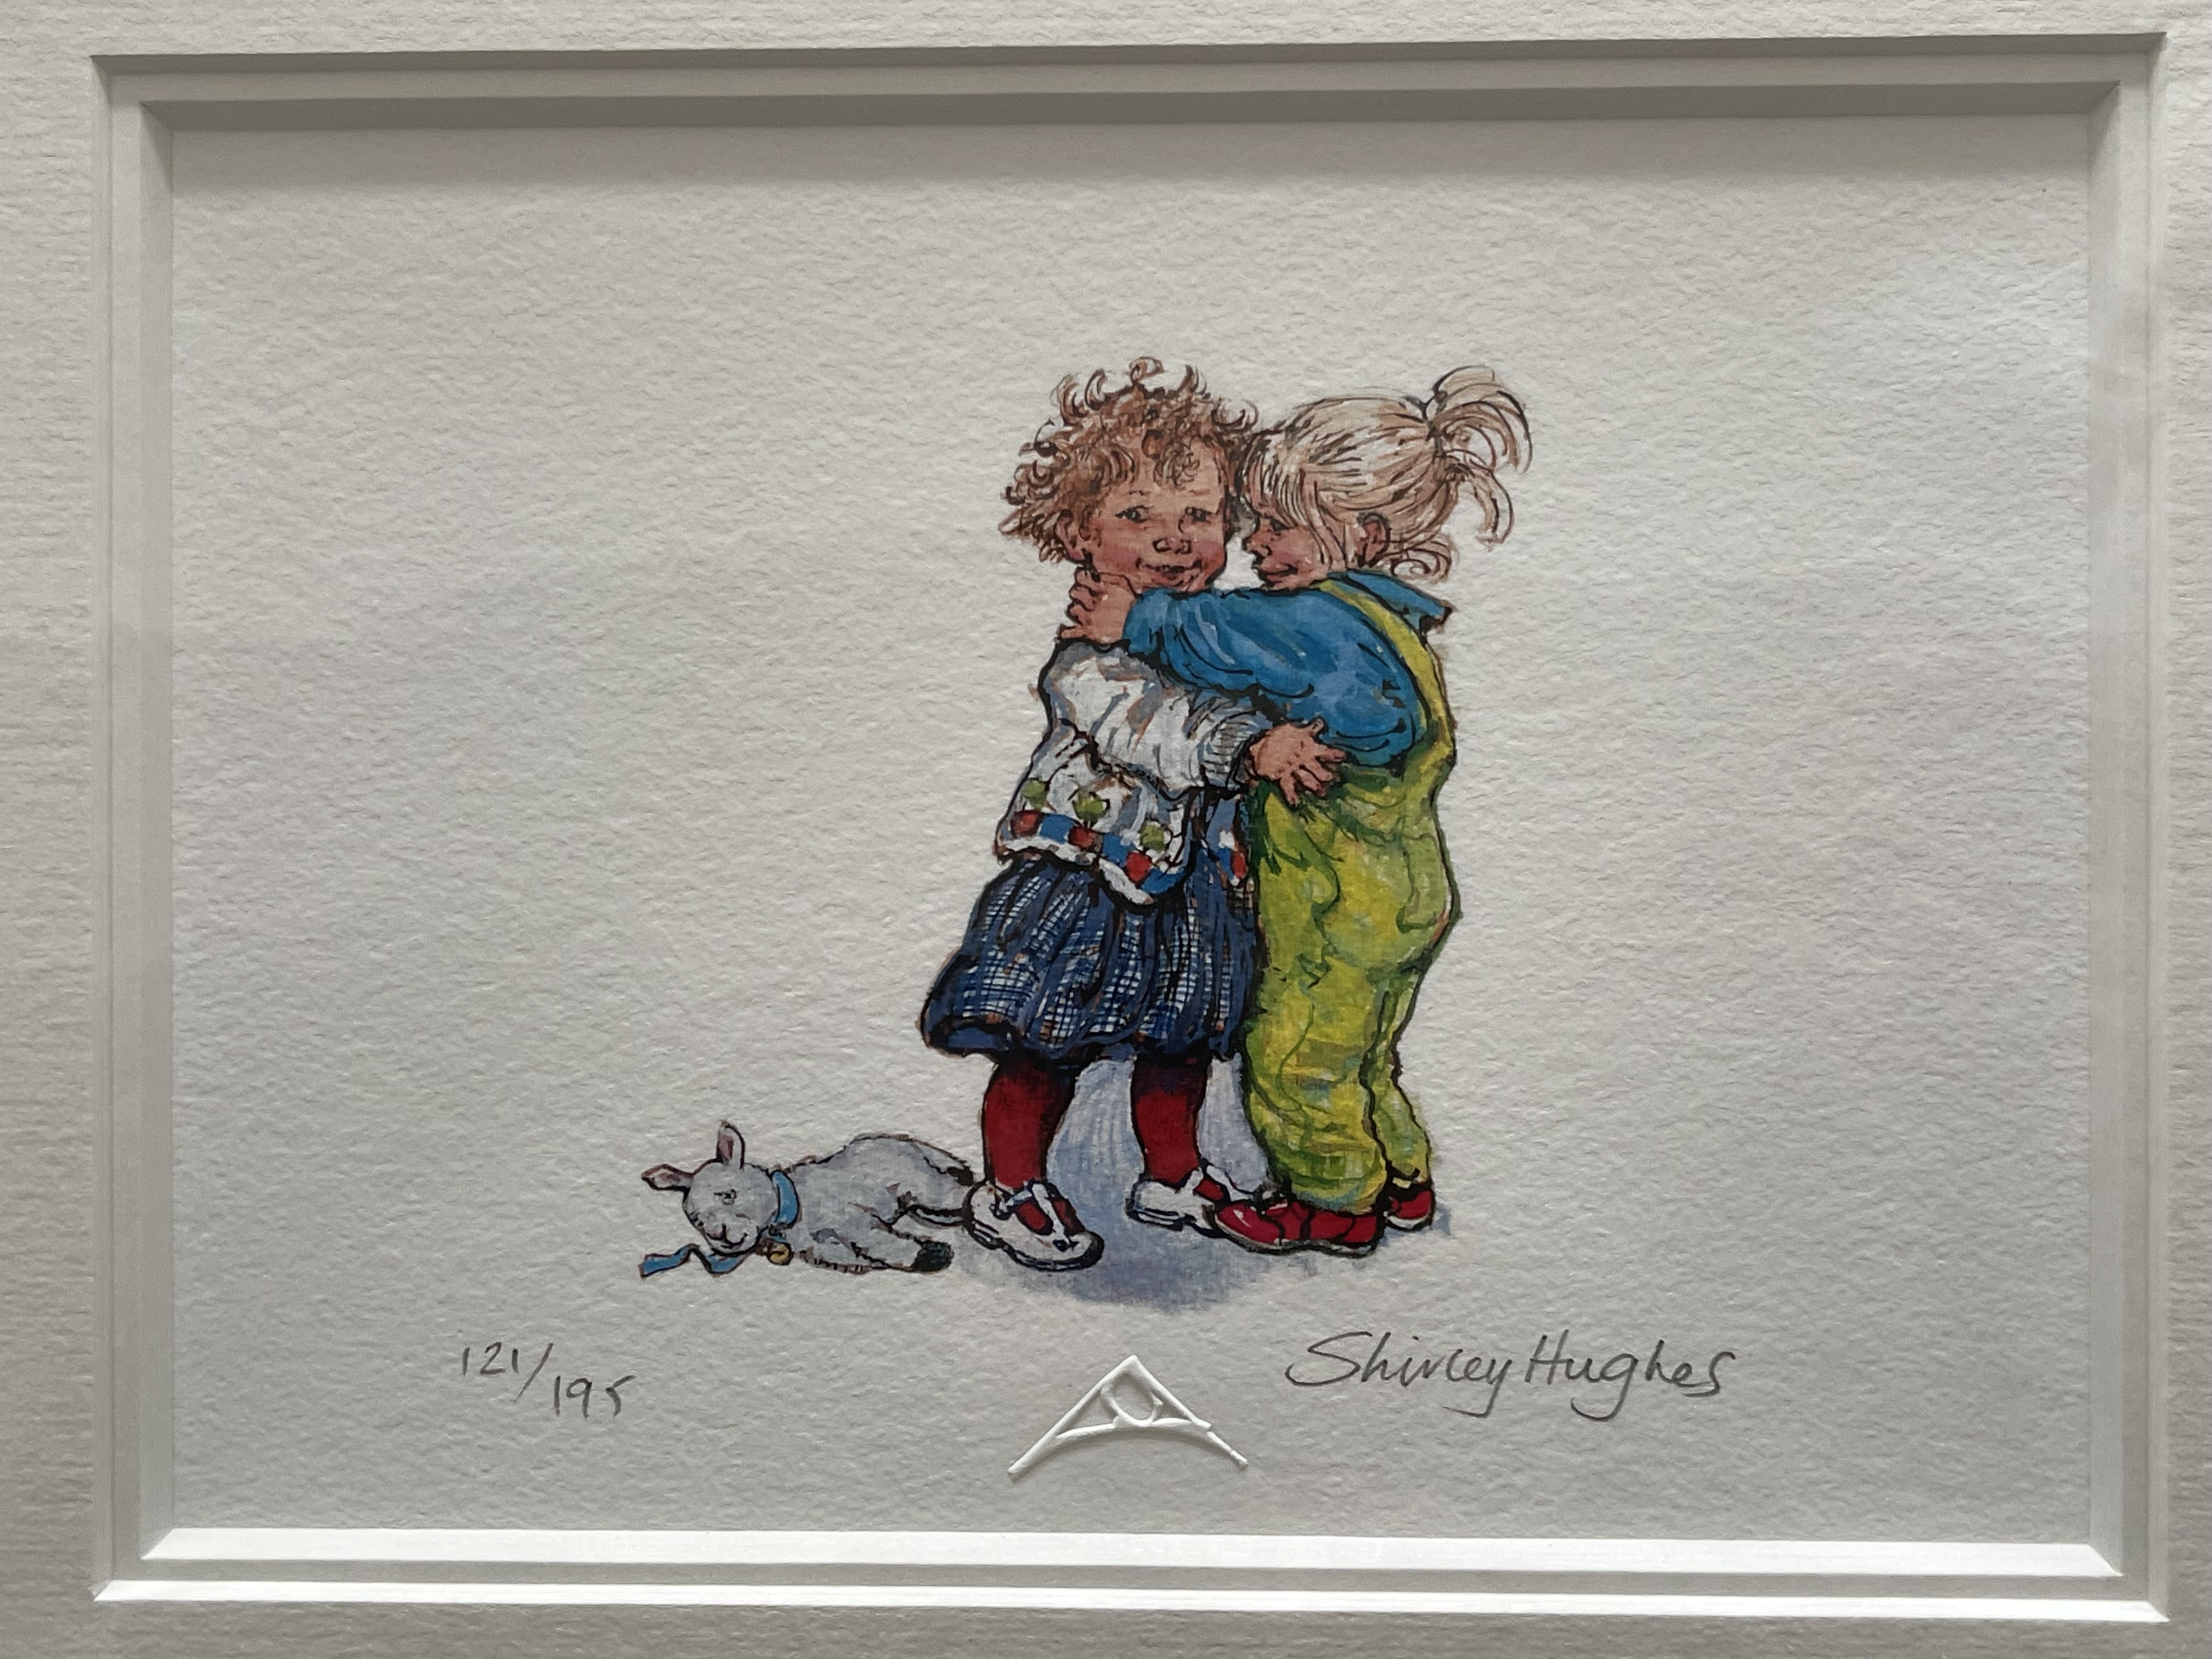 Fourteen Signed Giclée Prints by Shirley Hughes - - Image 28 of 51